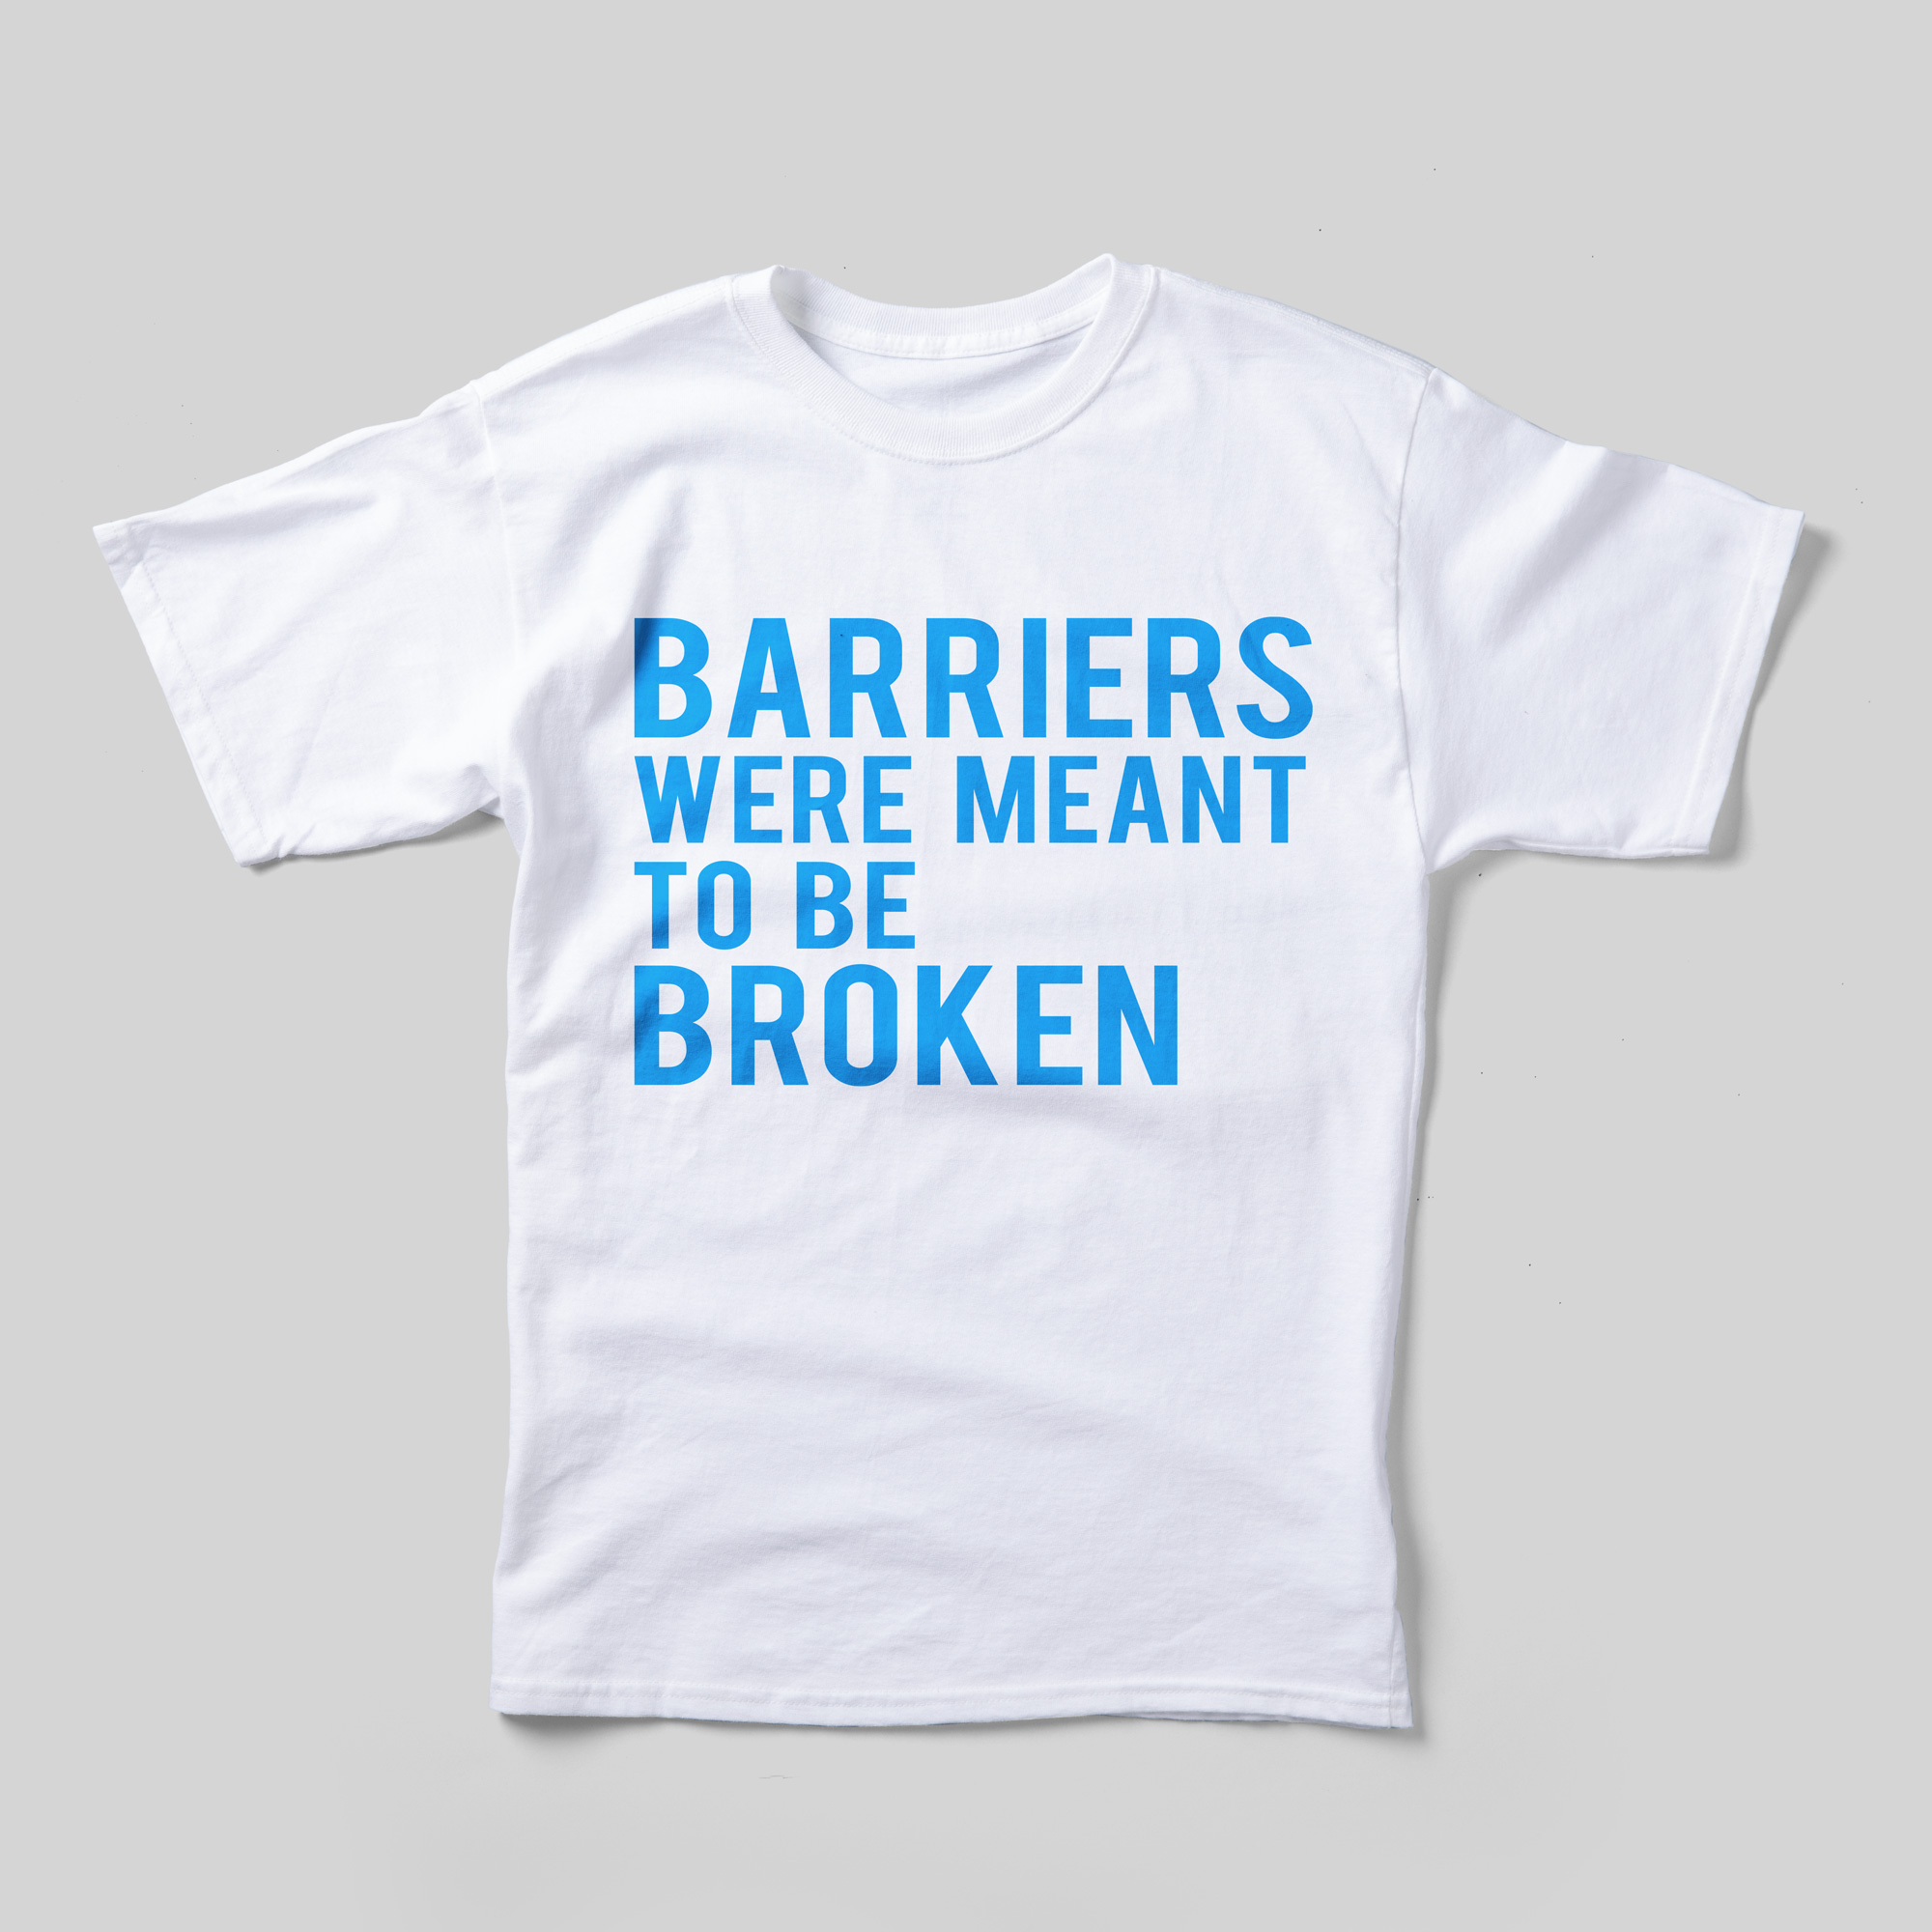 A white t-shirt that reads "Barriers were meant to be broken" in sky blue text.